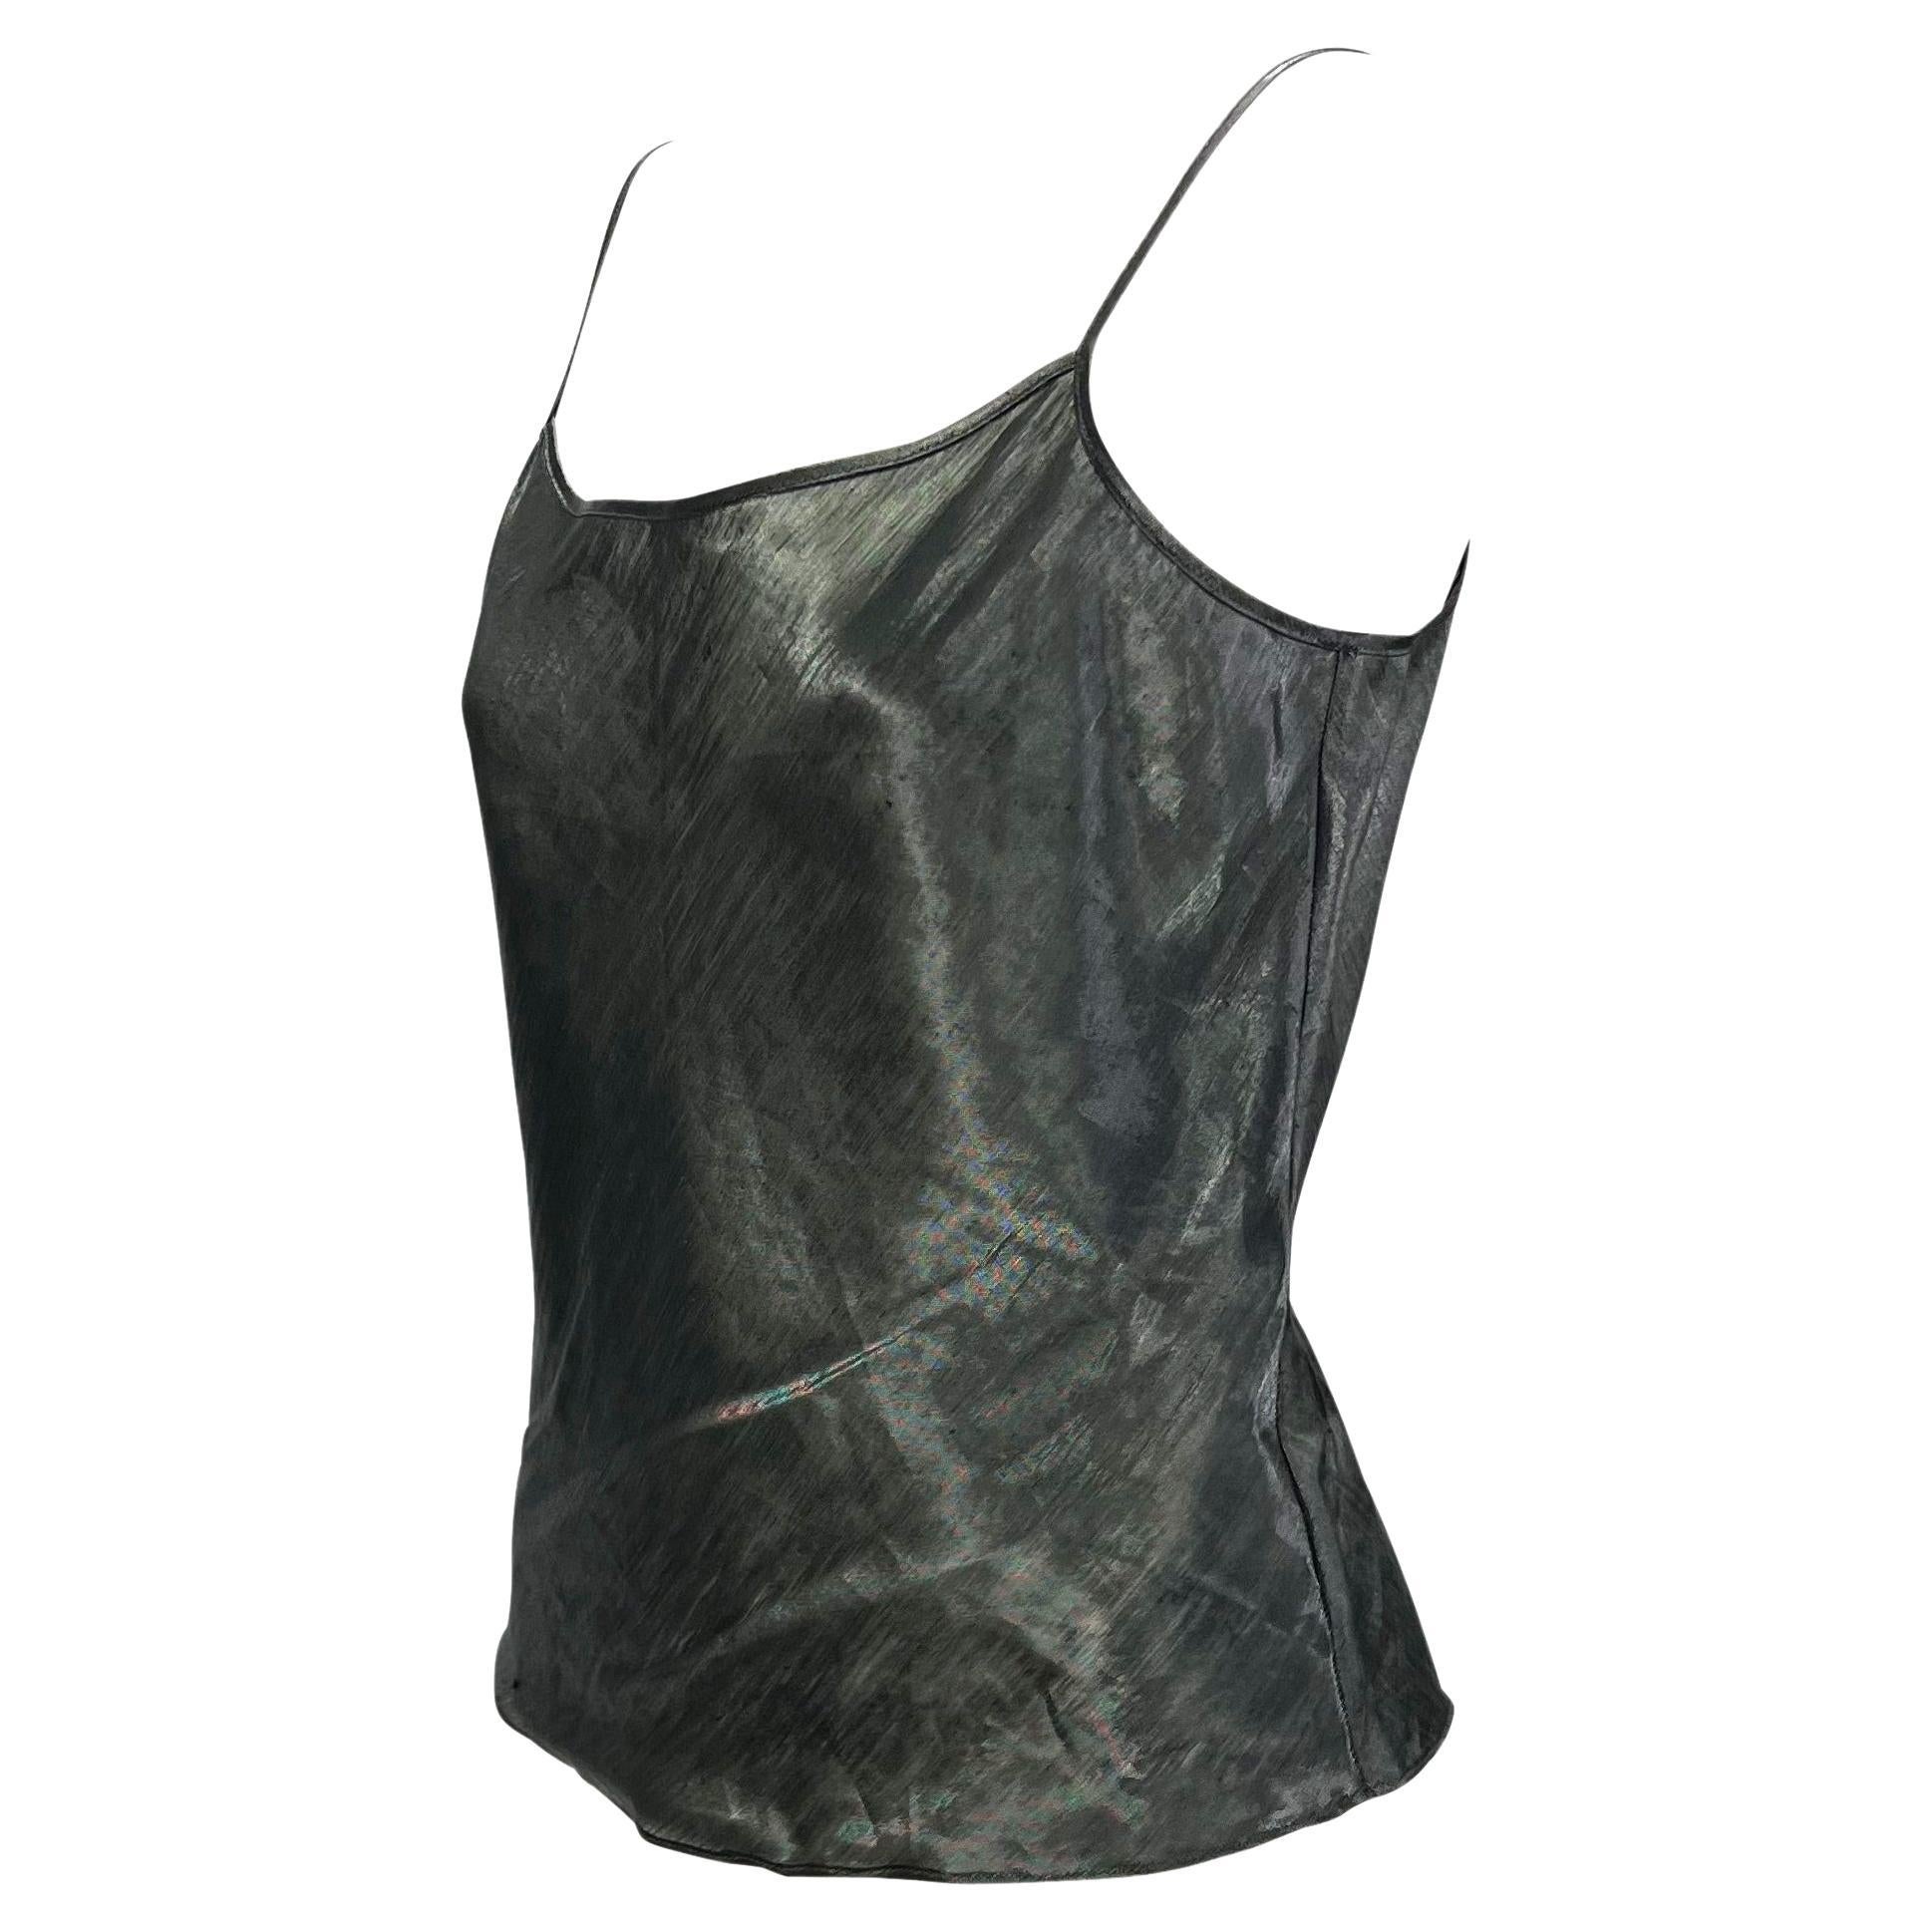 Presenting a rare sheer tank top designed by Tom Ford for Gucci's Spring/Summer 2000 collection. This special piece is constructed of a blend of metal and flax to create a sheer and lightweight tank that is sure to be your new favorite. Check out